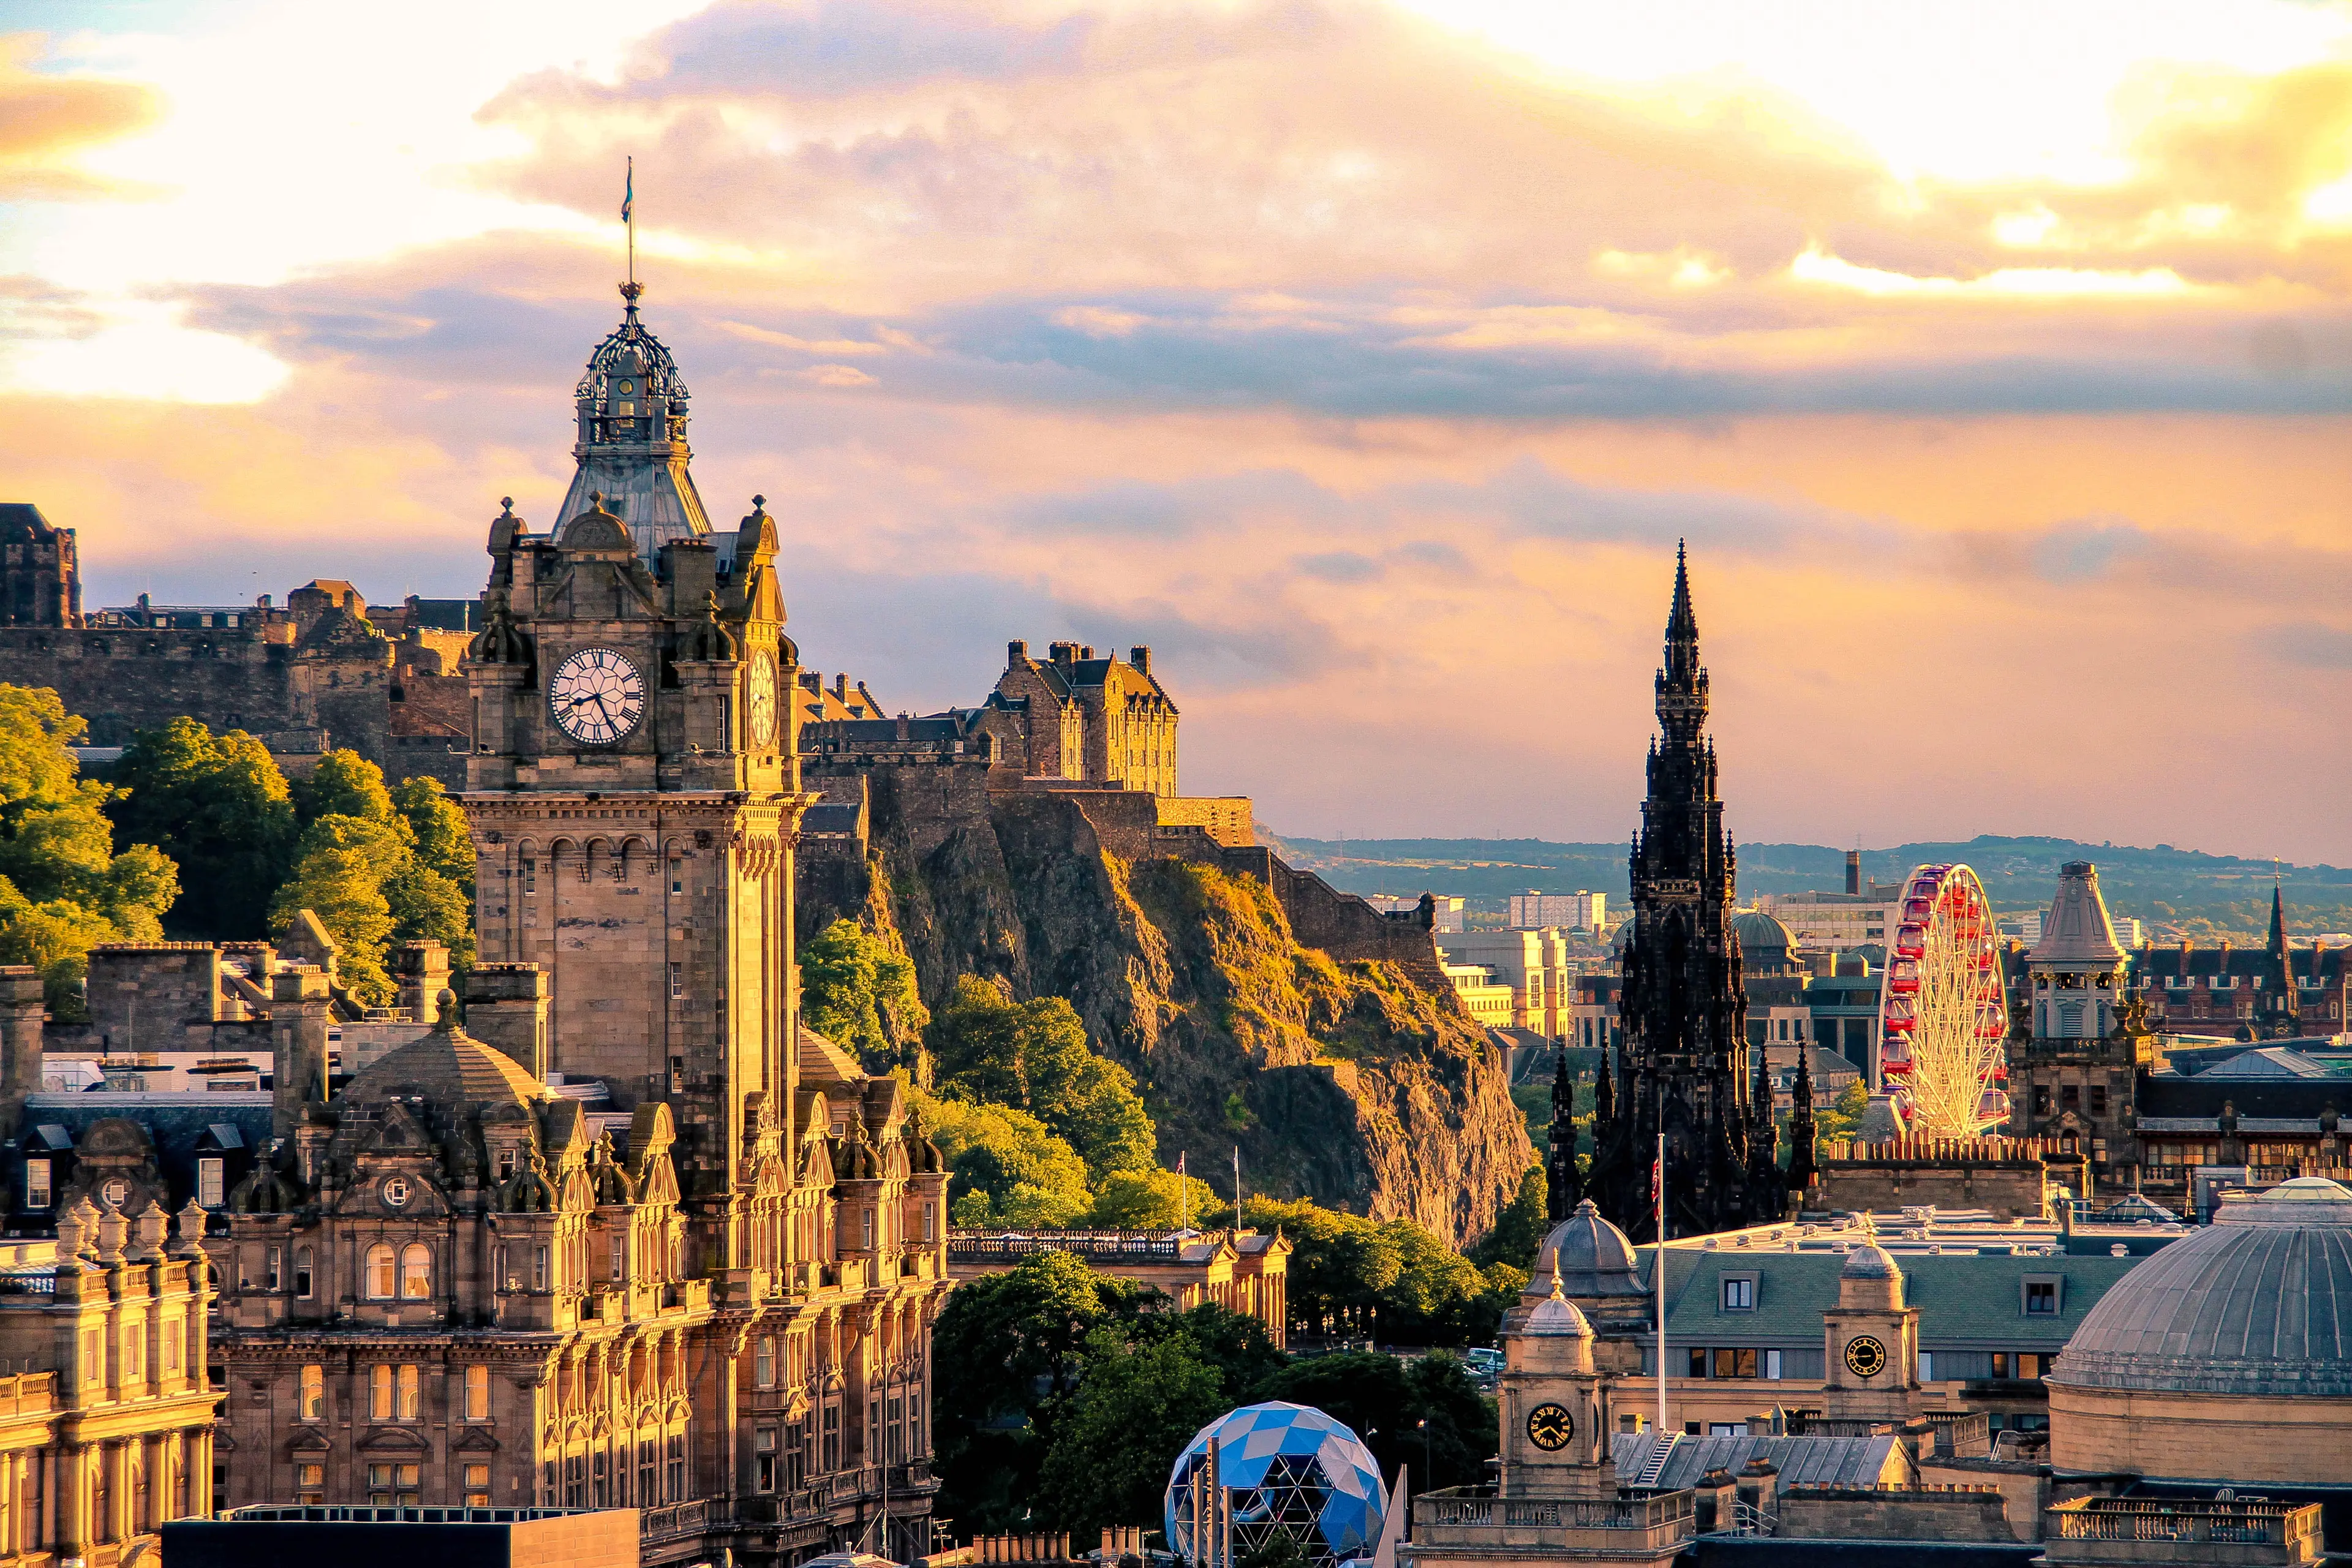 3-Day Romantic Edinburgh Getaway: Sights, Relaxation and Gourmet Delights